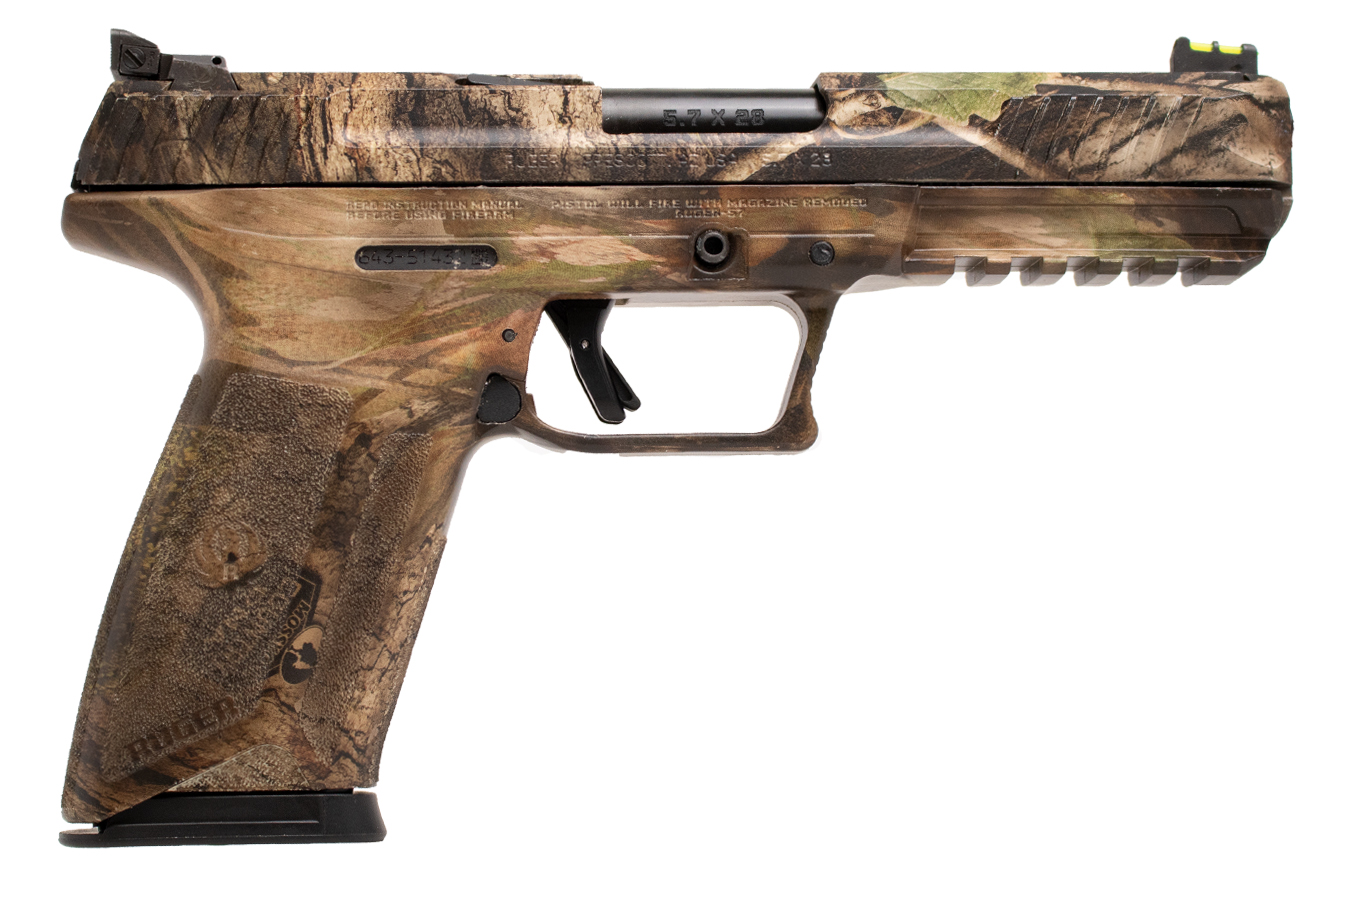 Shop Ruger Ruger-57 5.7x28mm Pistol with Mossy Oak DNA Camo Finish for ...